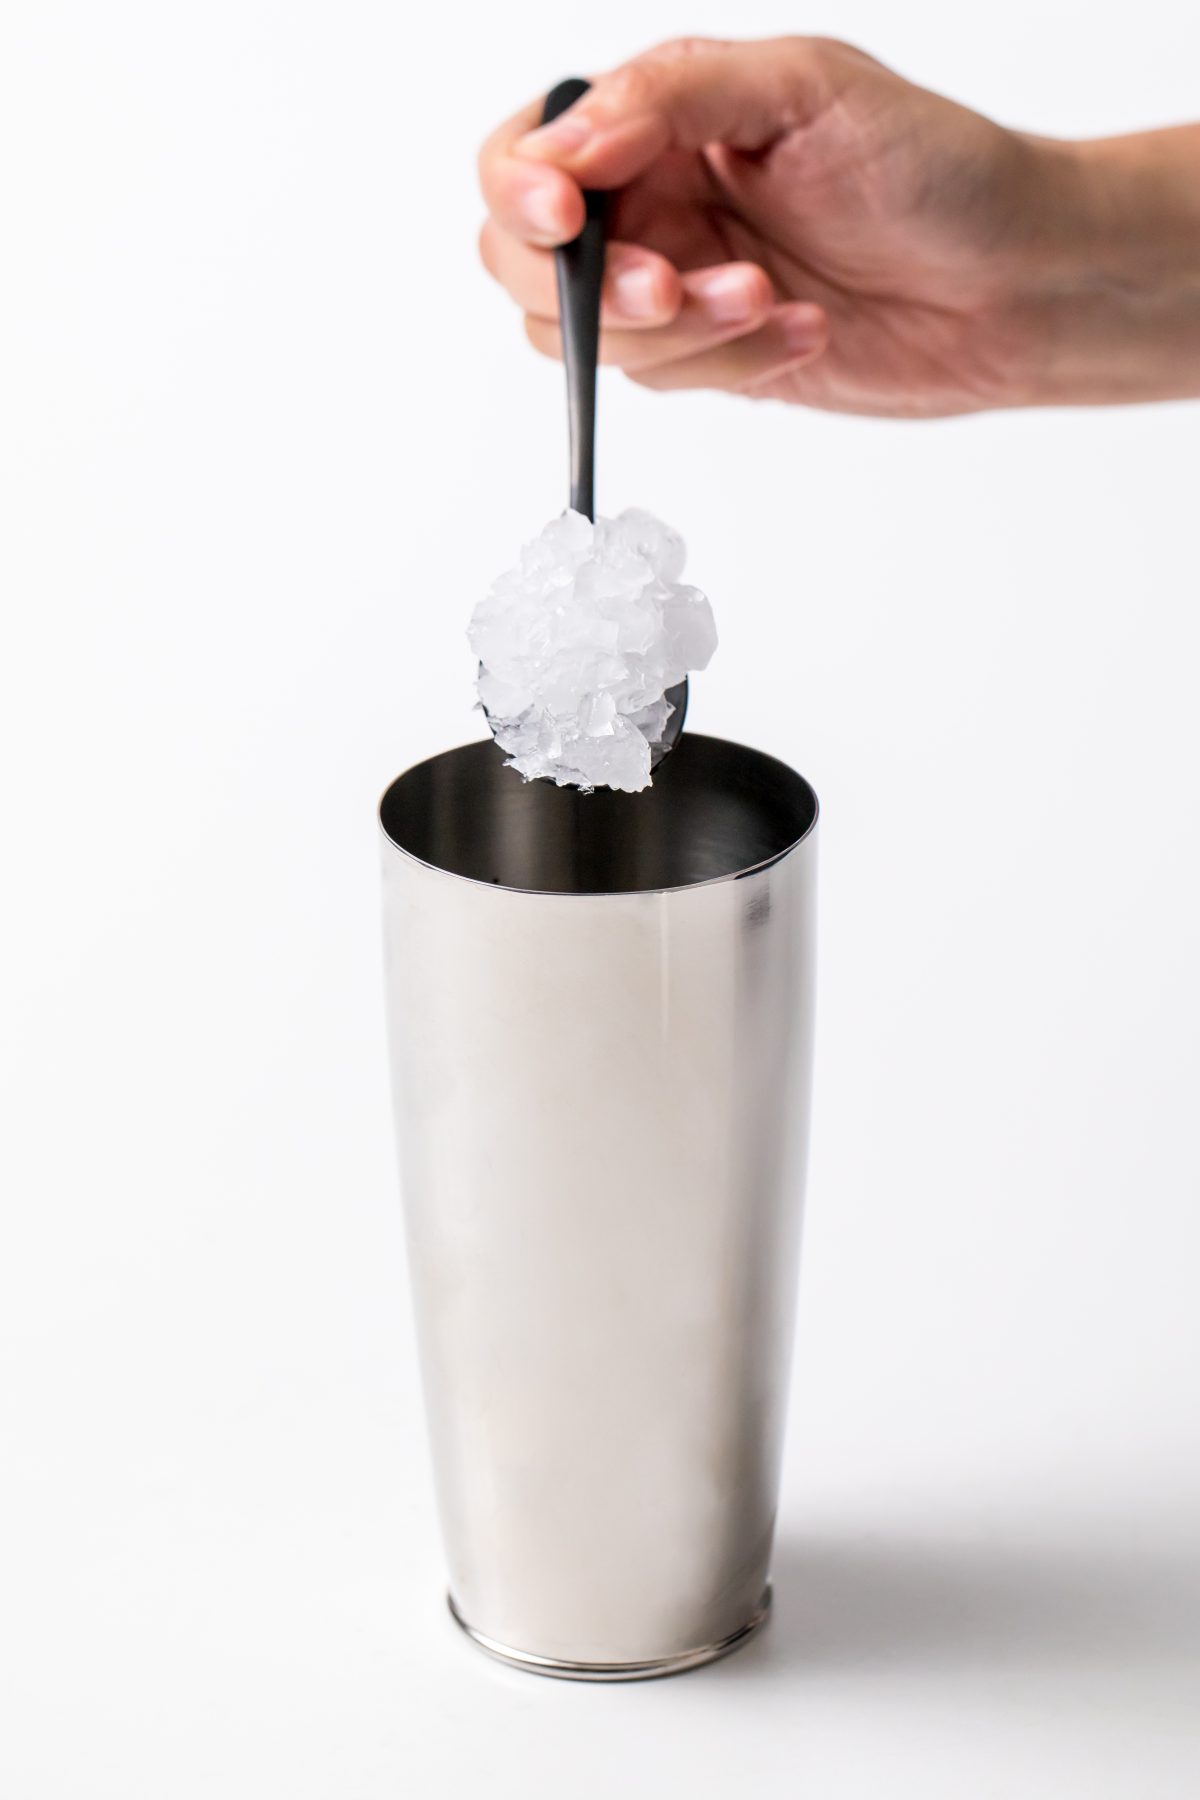 5D4B4264 - Gingersnap Martini - Add ice to the shaker